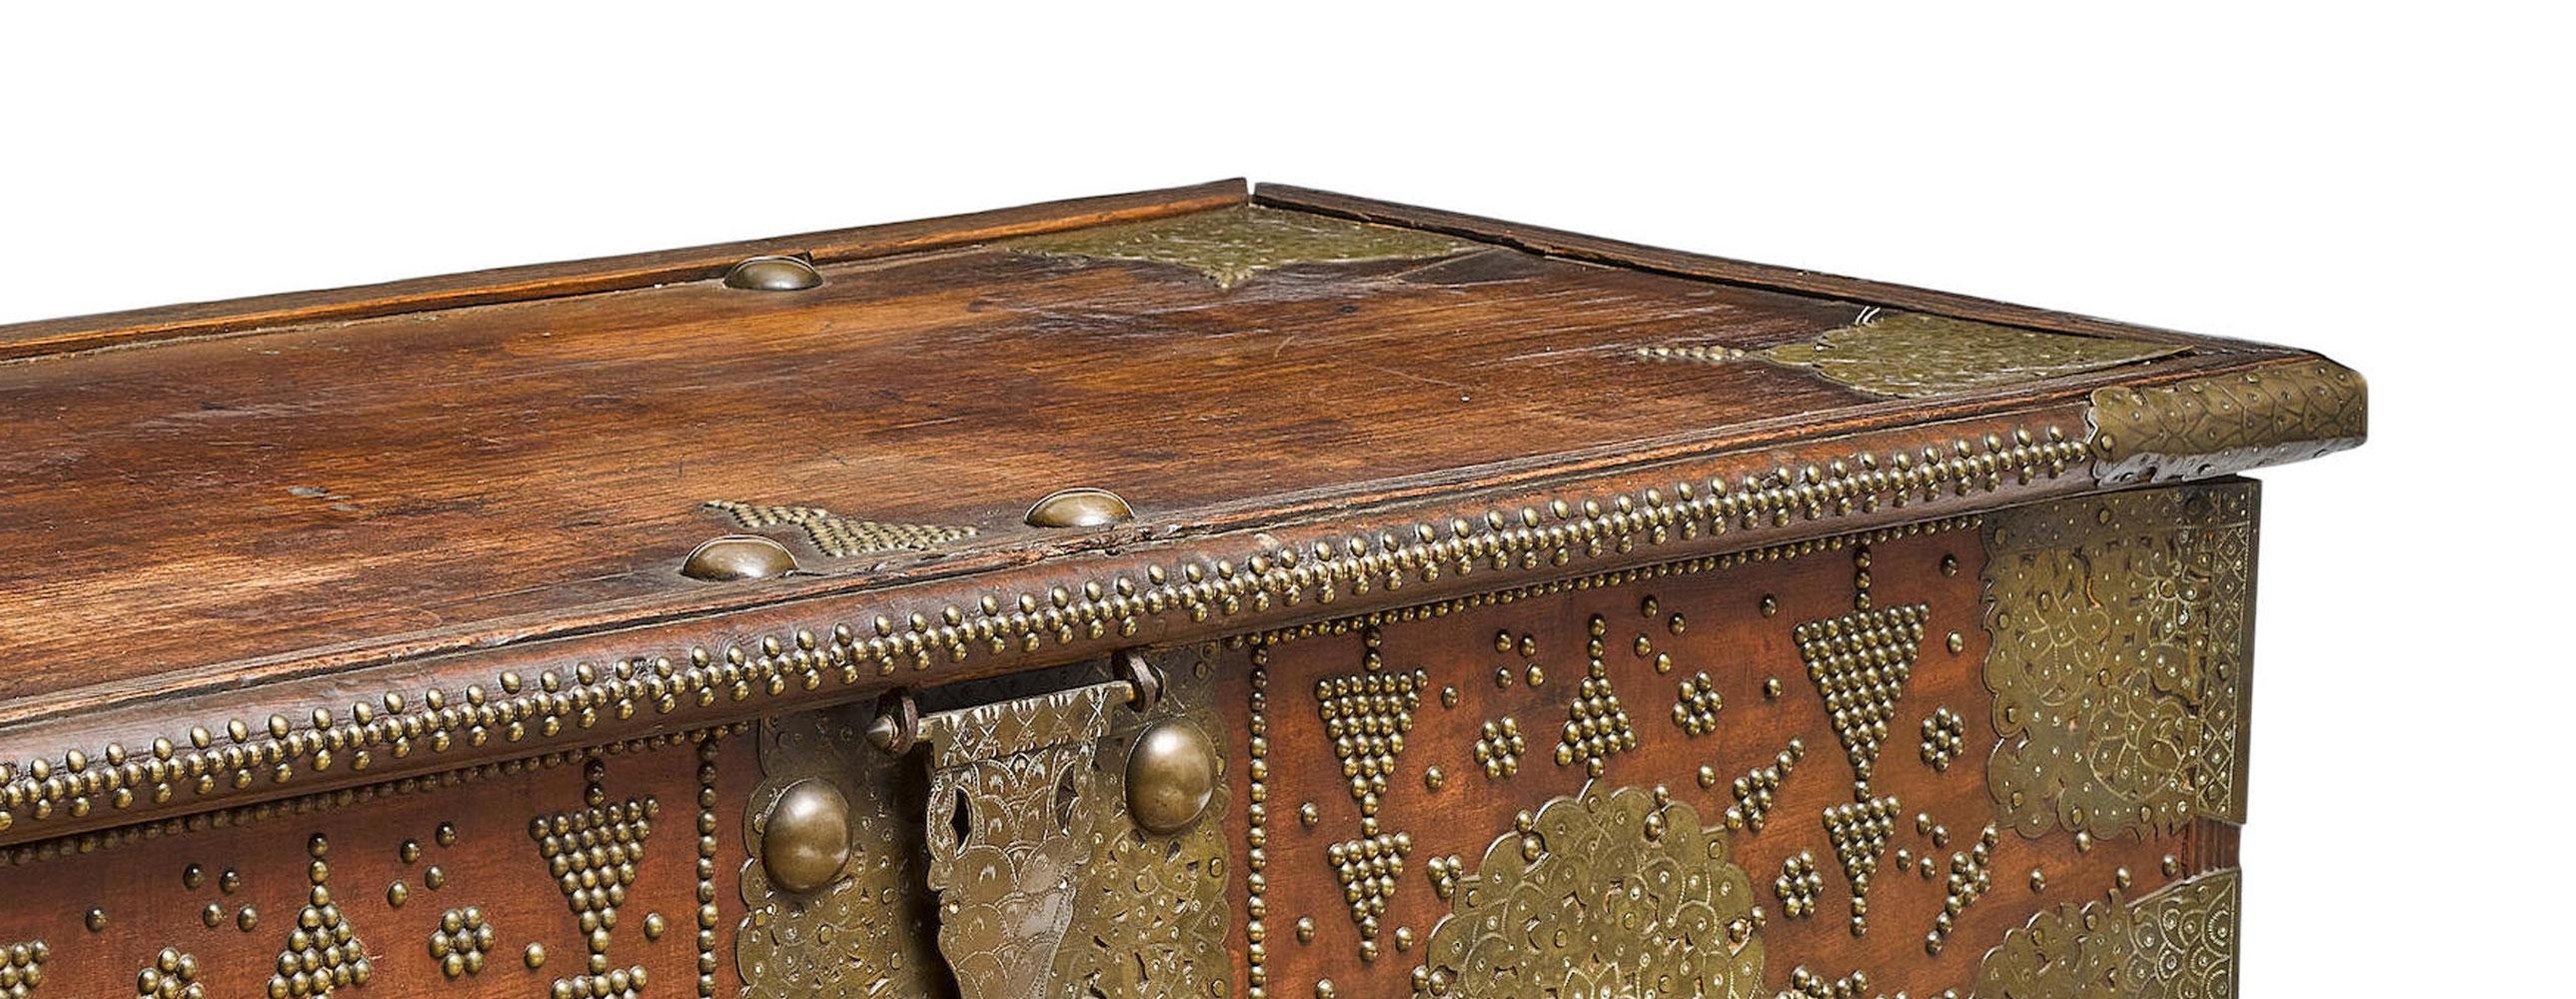 Indian Brass Mounted Stained Hardwood Box, India, Circa 1850 For Sale 3